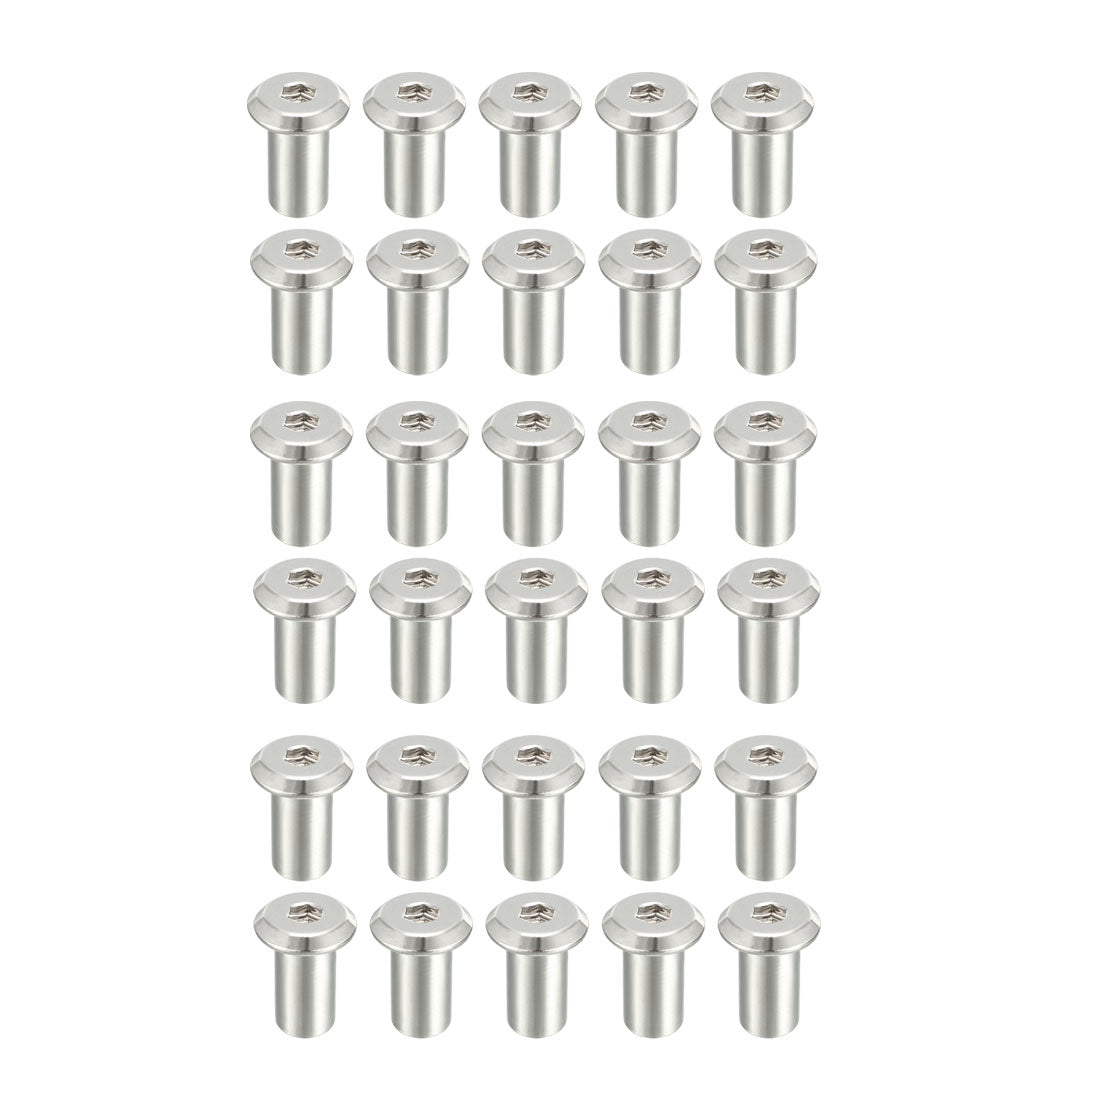 uxcell Uxcell M6x15mm Hex Socket Head Insert Nut Screw Post Sleeve Nut for Furniture 30pcs